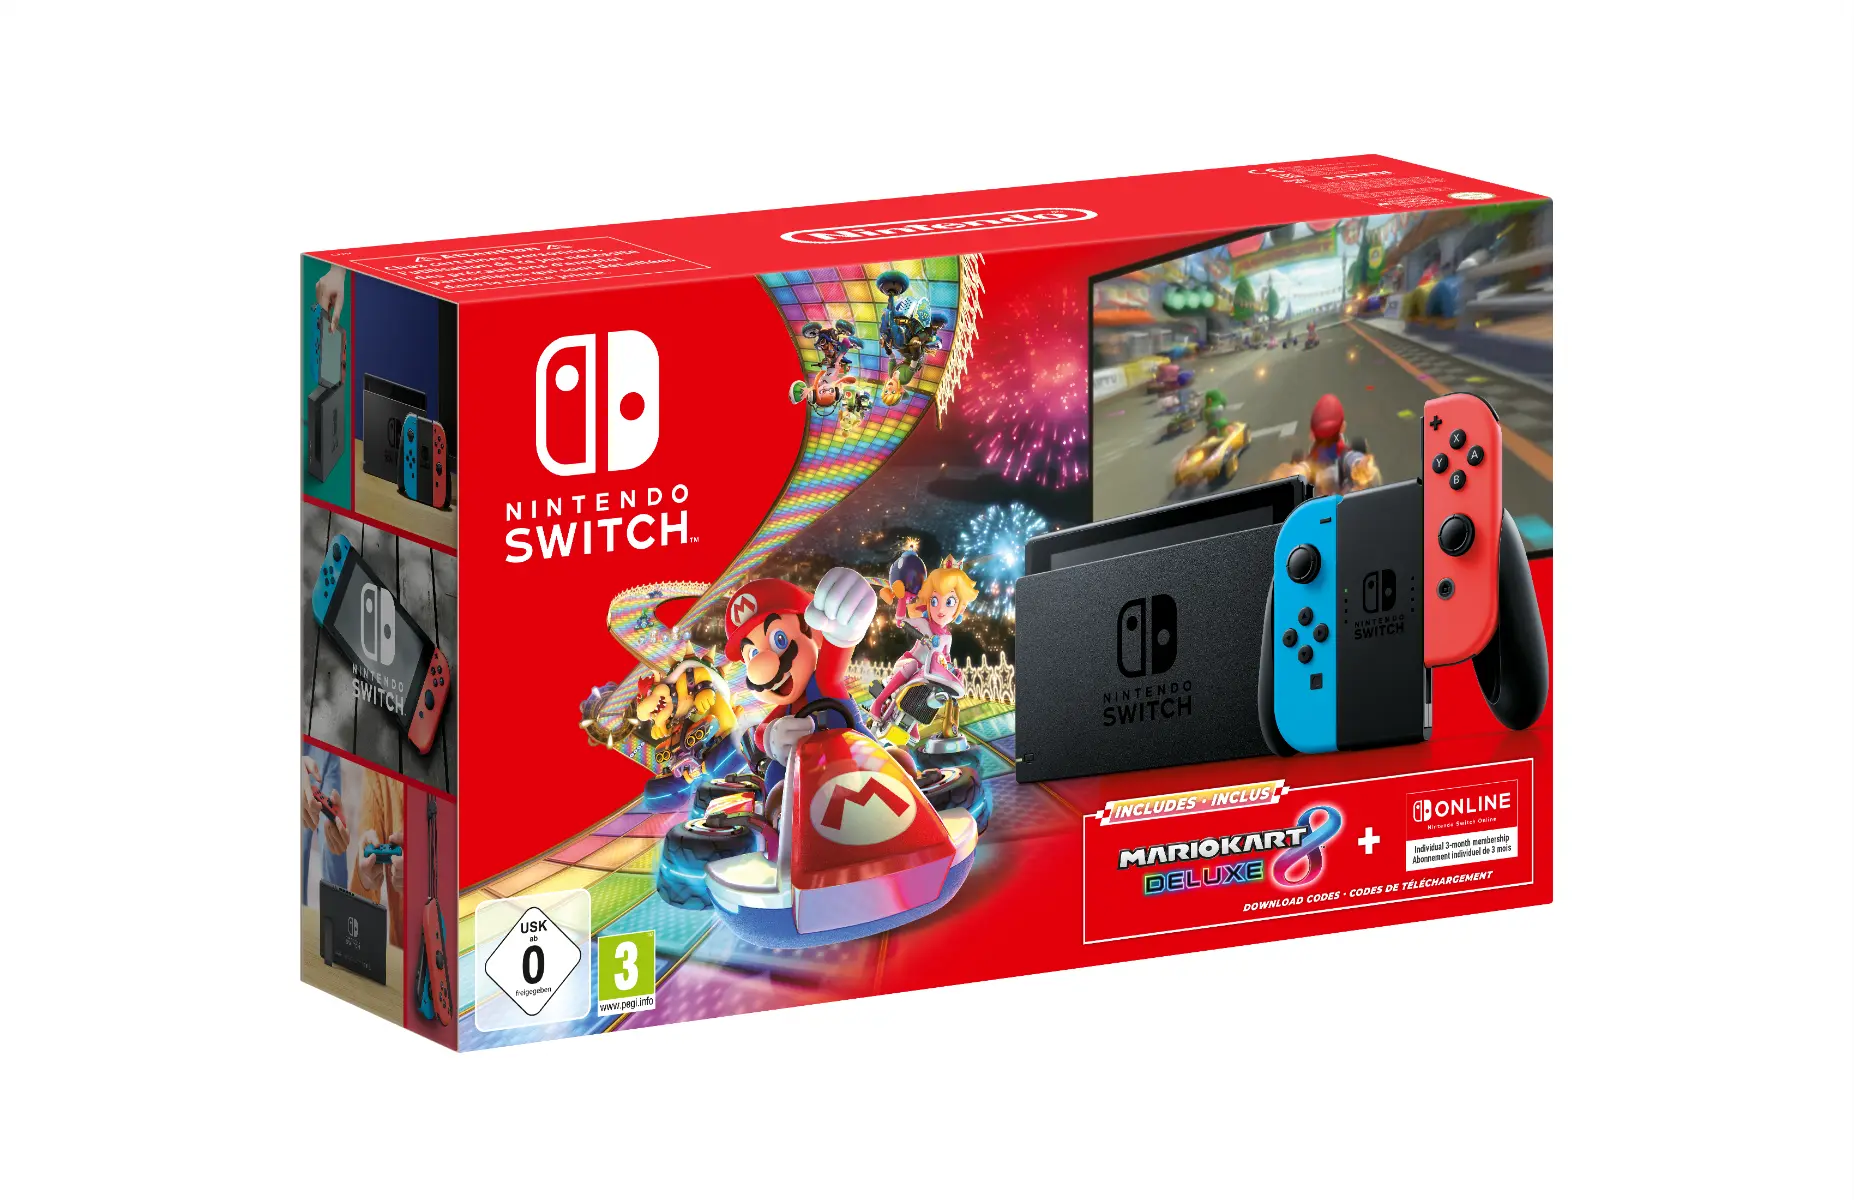 Consola Nintendo Switch + Mario Kart 8 Deluxe + 3M NSO